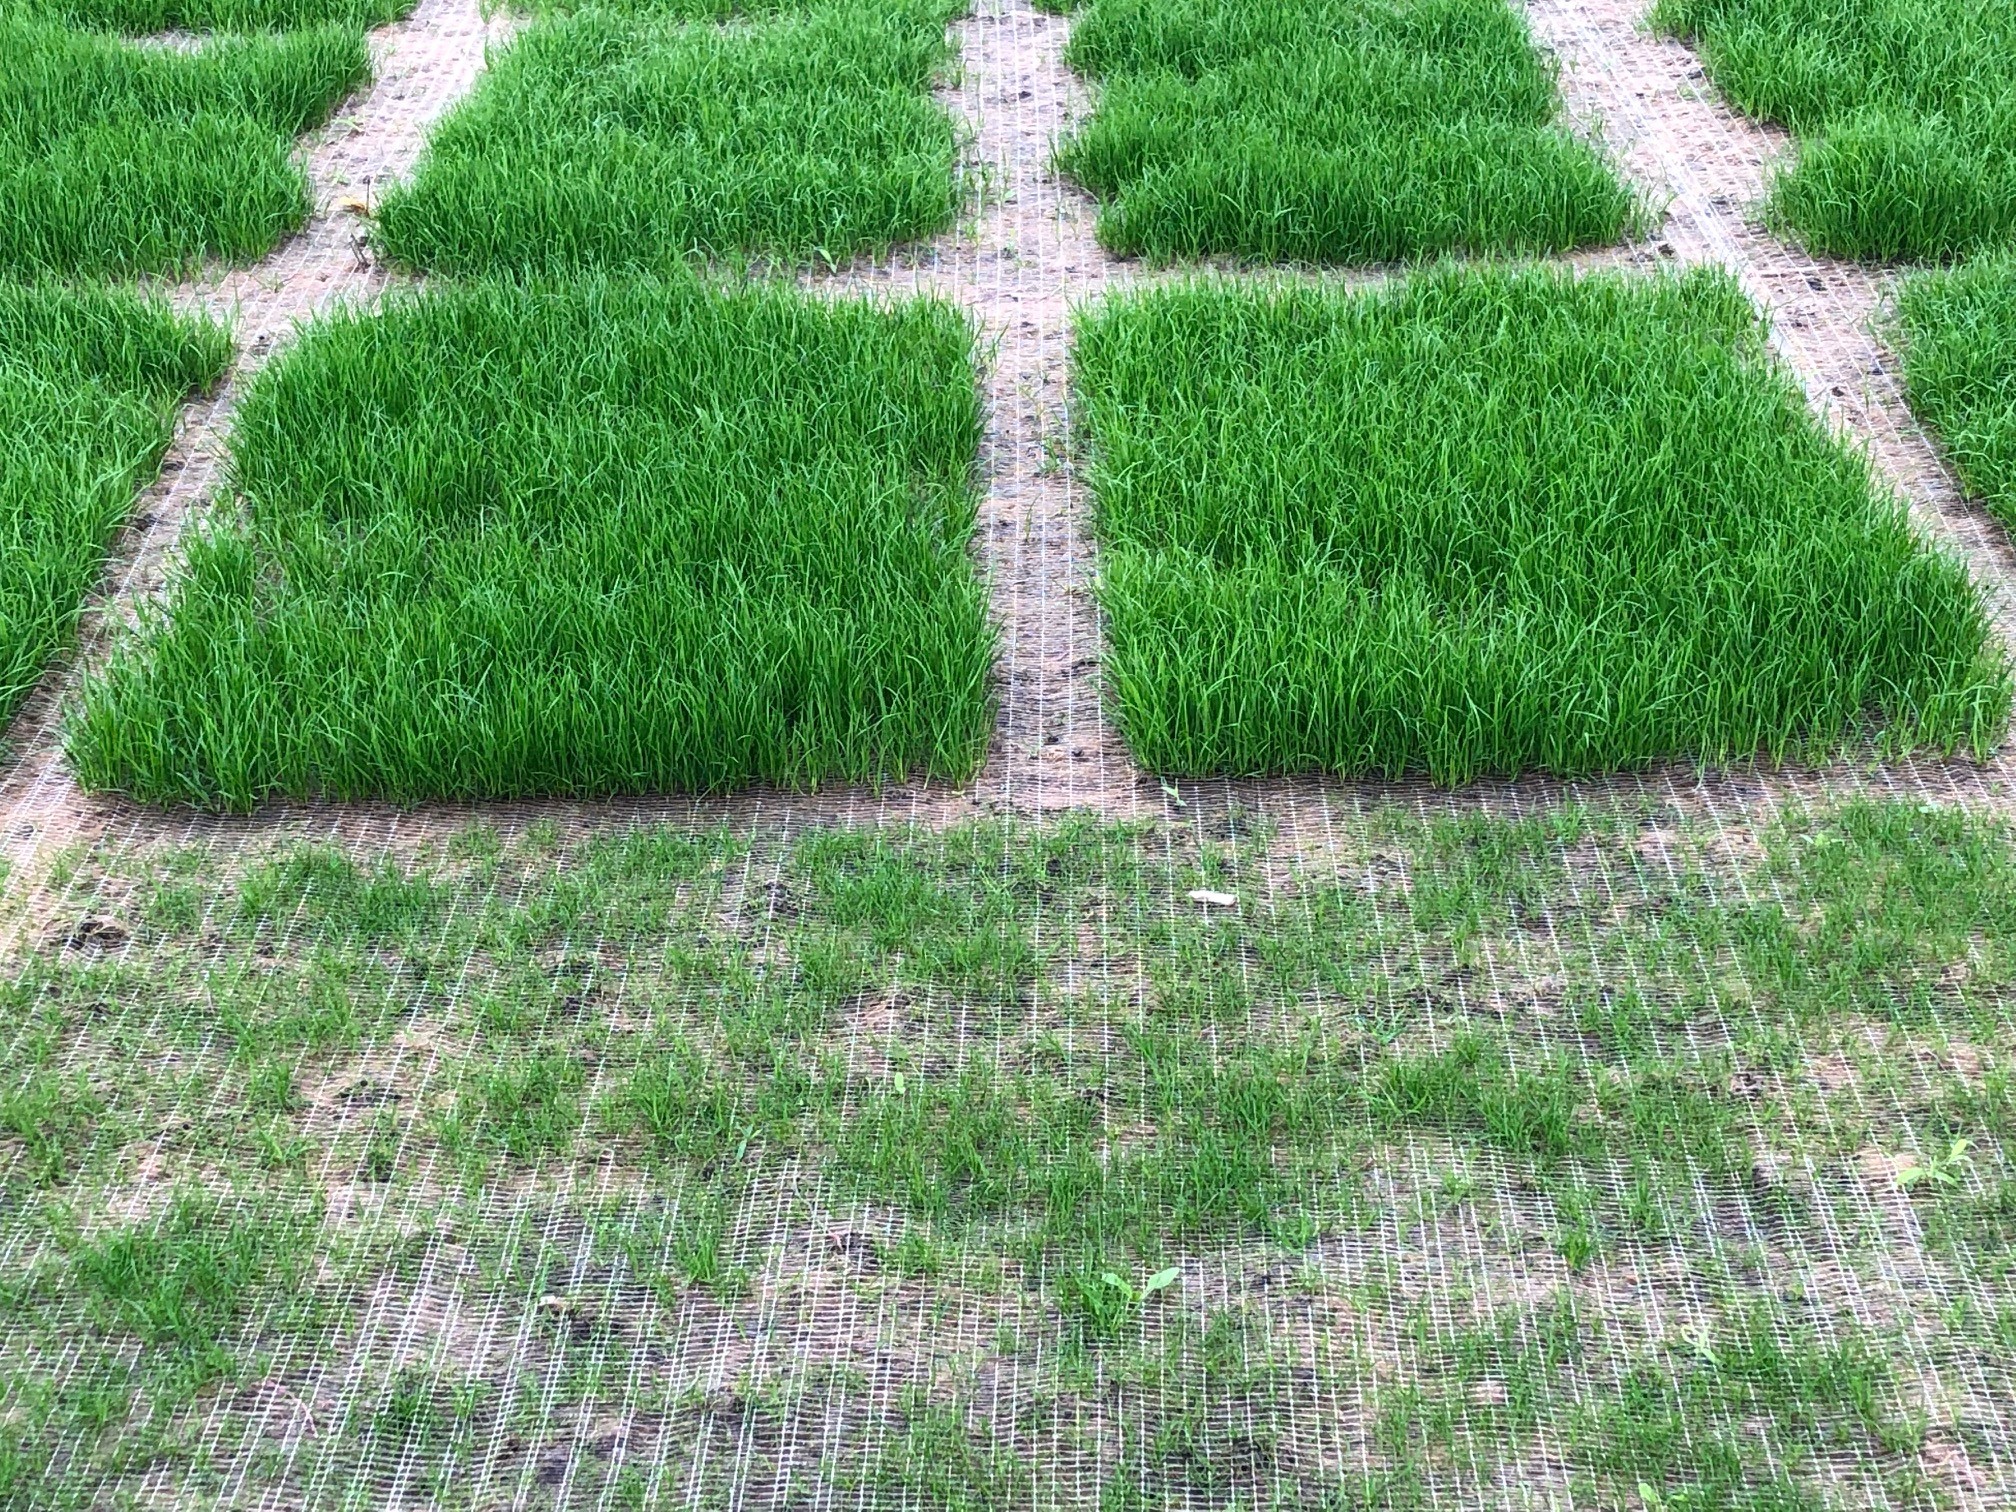 square research plots with turfgrass growing 